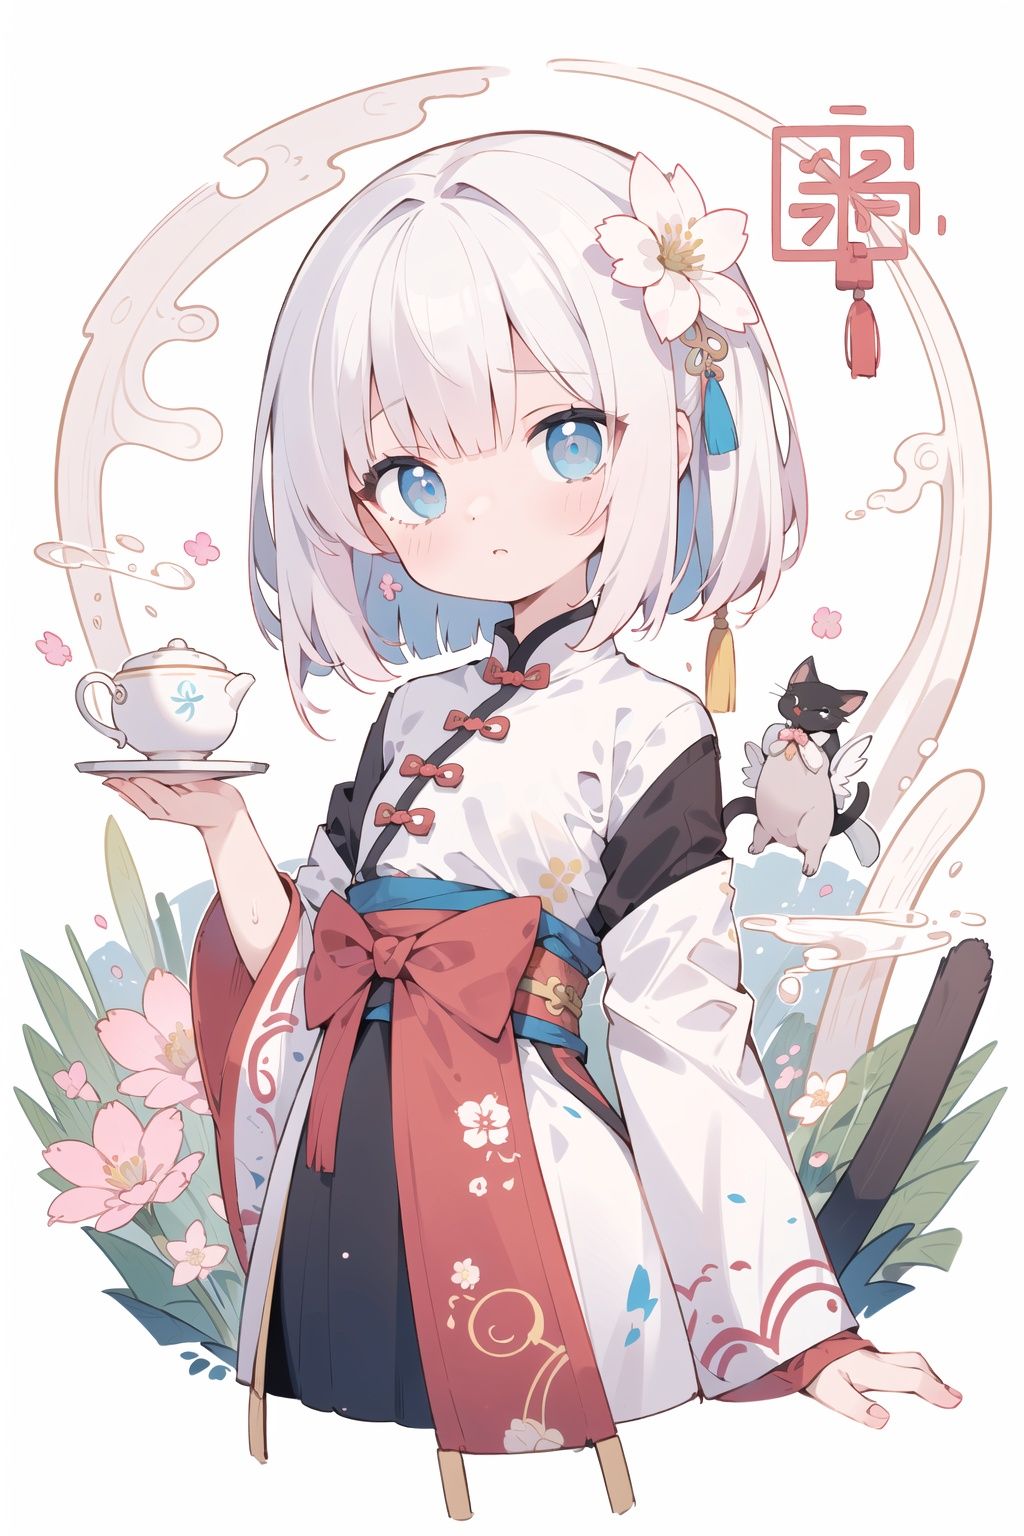 arms behind back,
(((masterpiece))),best quality,watercolor,(((illustration)),((Chinese_style)), (((beautiful detailed girl))),small chest,cat,tea, ((delicate cute face)),blue_eyes,watery_eyes, bob_cut,white_hair,flower, (hanfu),silky,pink,luxuriant,layered dress, (in_spring),beautiful_landscape,light particles,(((masterpiece))),best quality,watercolor,(((illustration)),((Chinese_style)), (((beautiful detailed girl))),small chest,cat,tea, ((delicate cute face)),blue_eyes,watery_eyes, bob_cut,white_hair,flower, (hanfu),silky,pink,luxuriant,layered dress, (in_spring),beautiful_landscape,light particles,